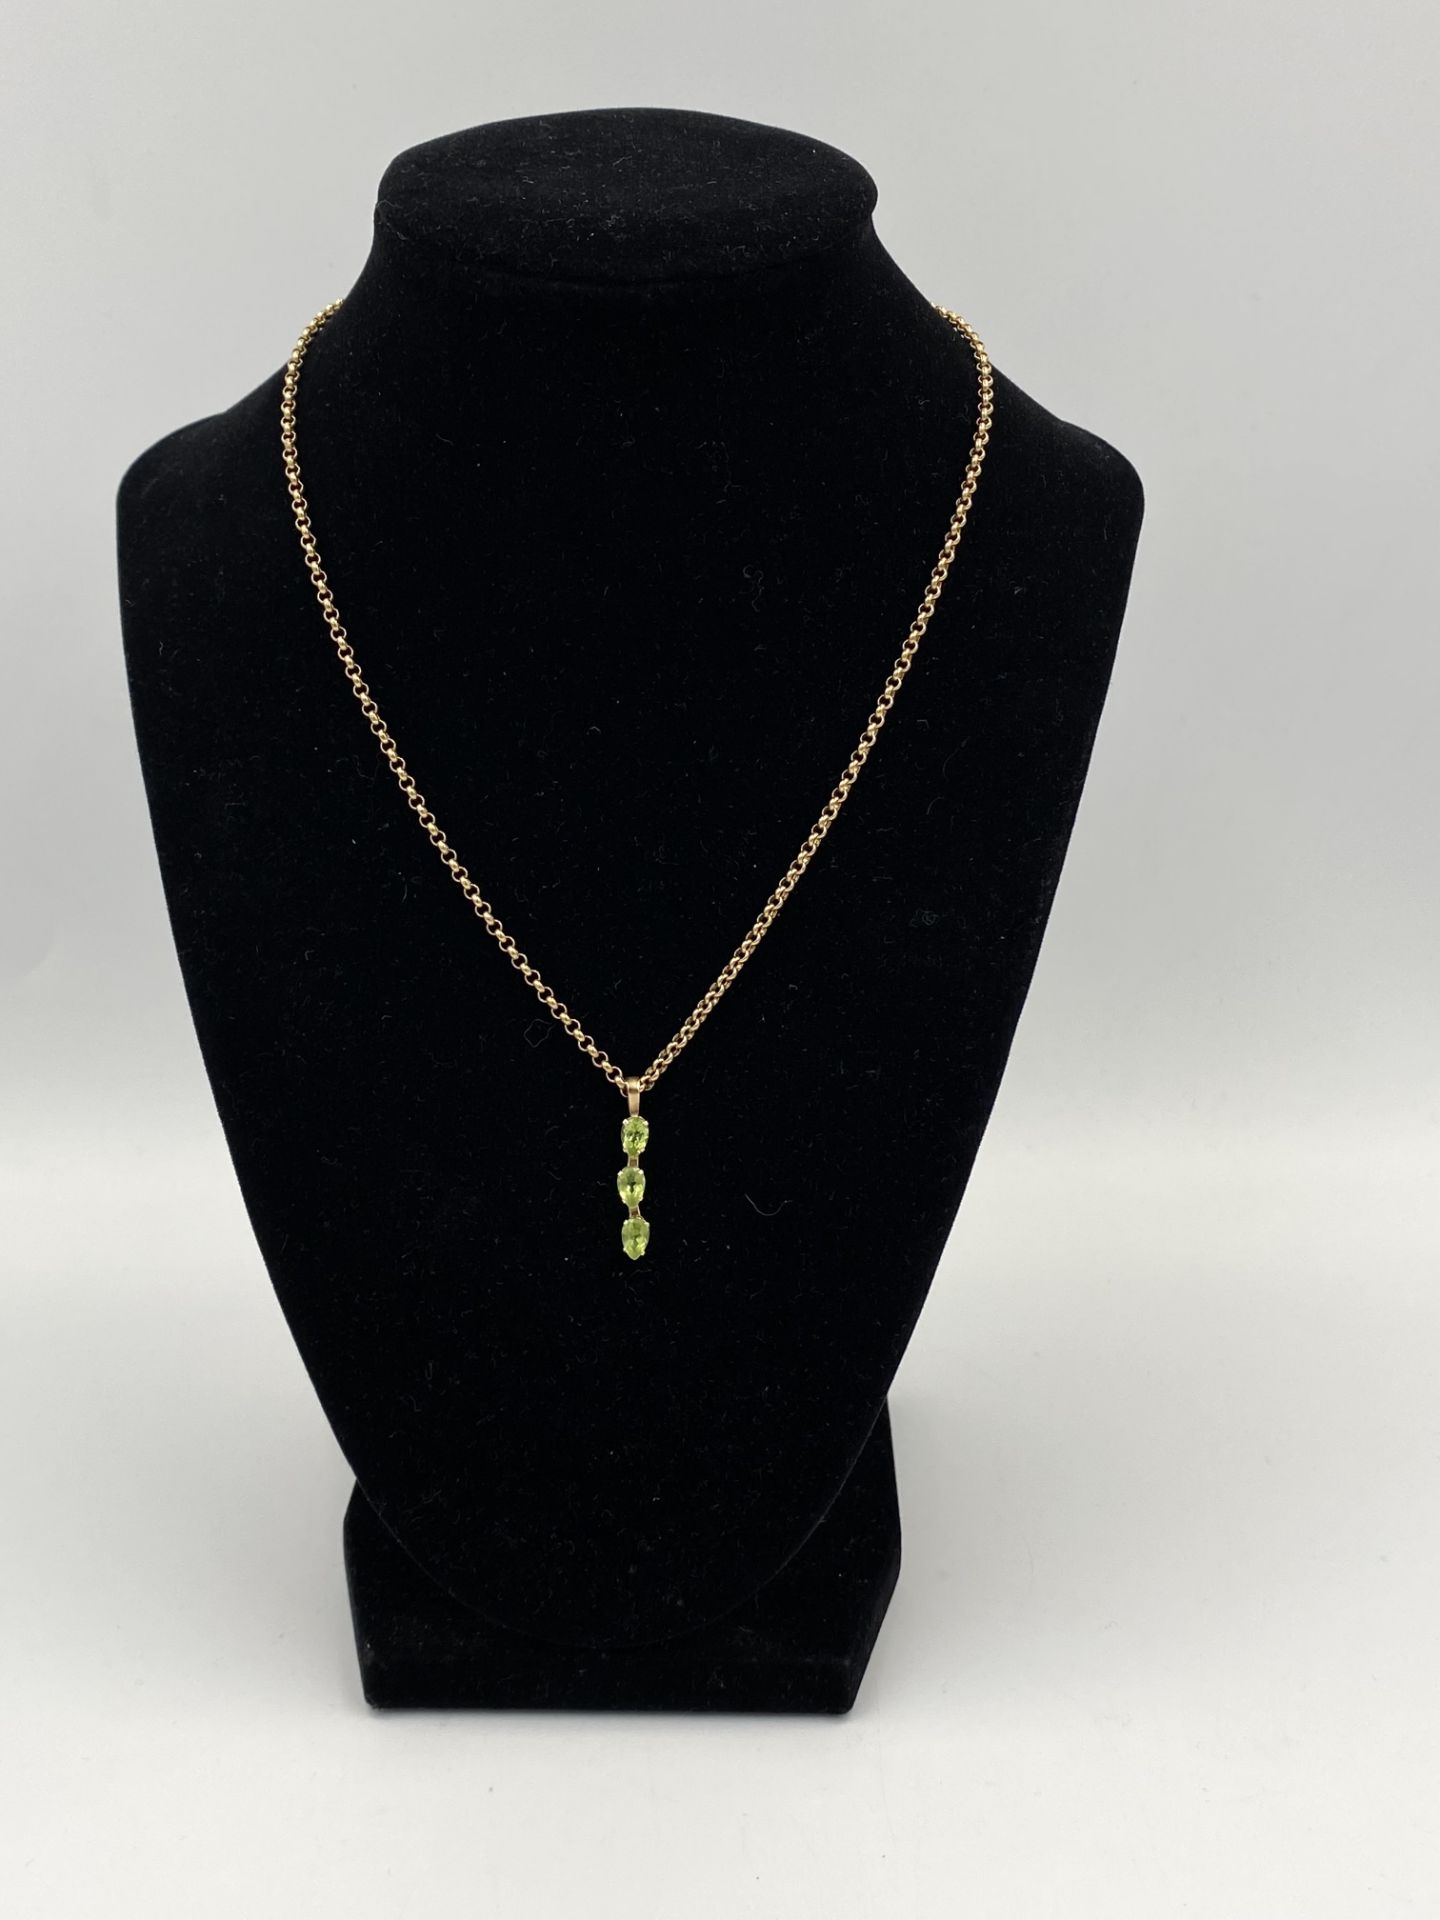 9ct gold chain with yellow metal and green stone pendant - Image 3 of 5